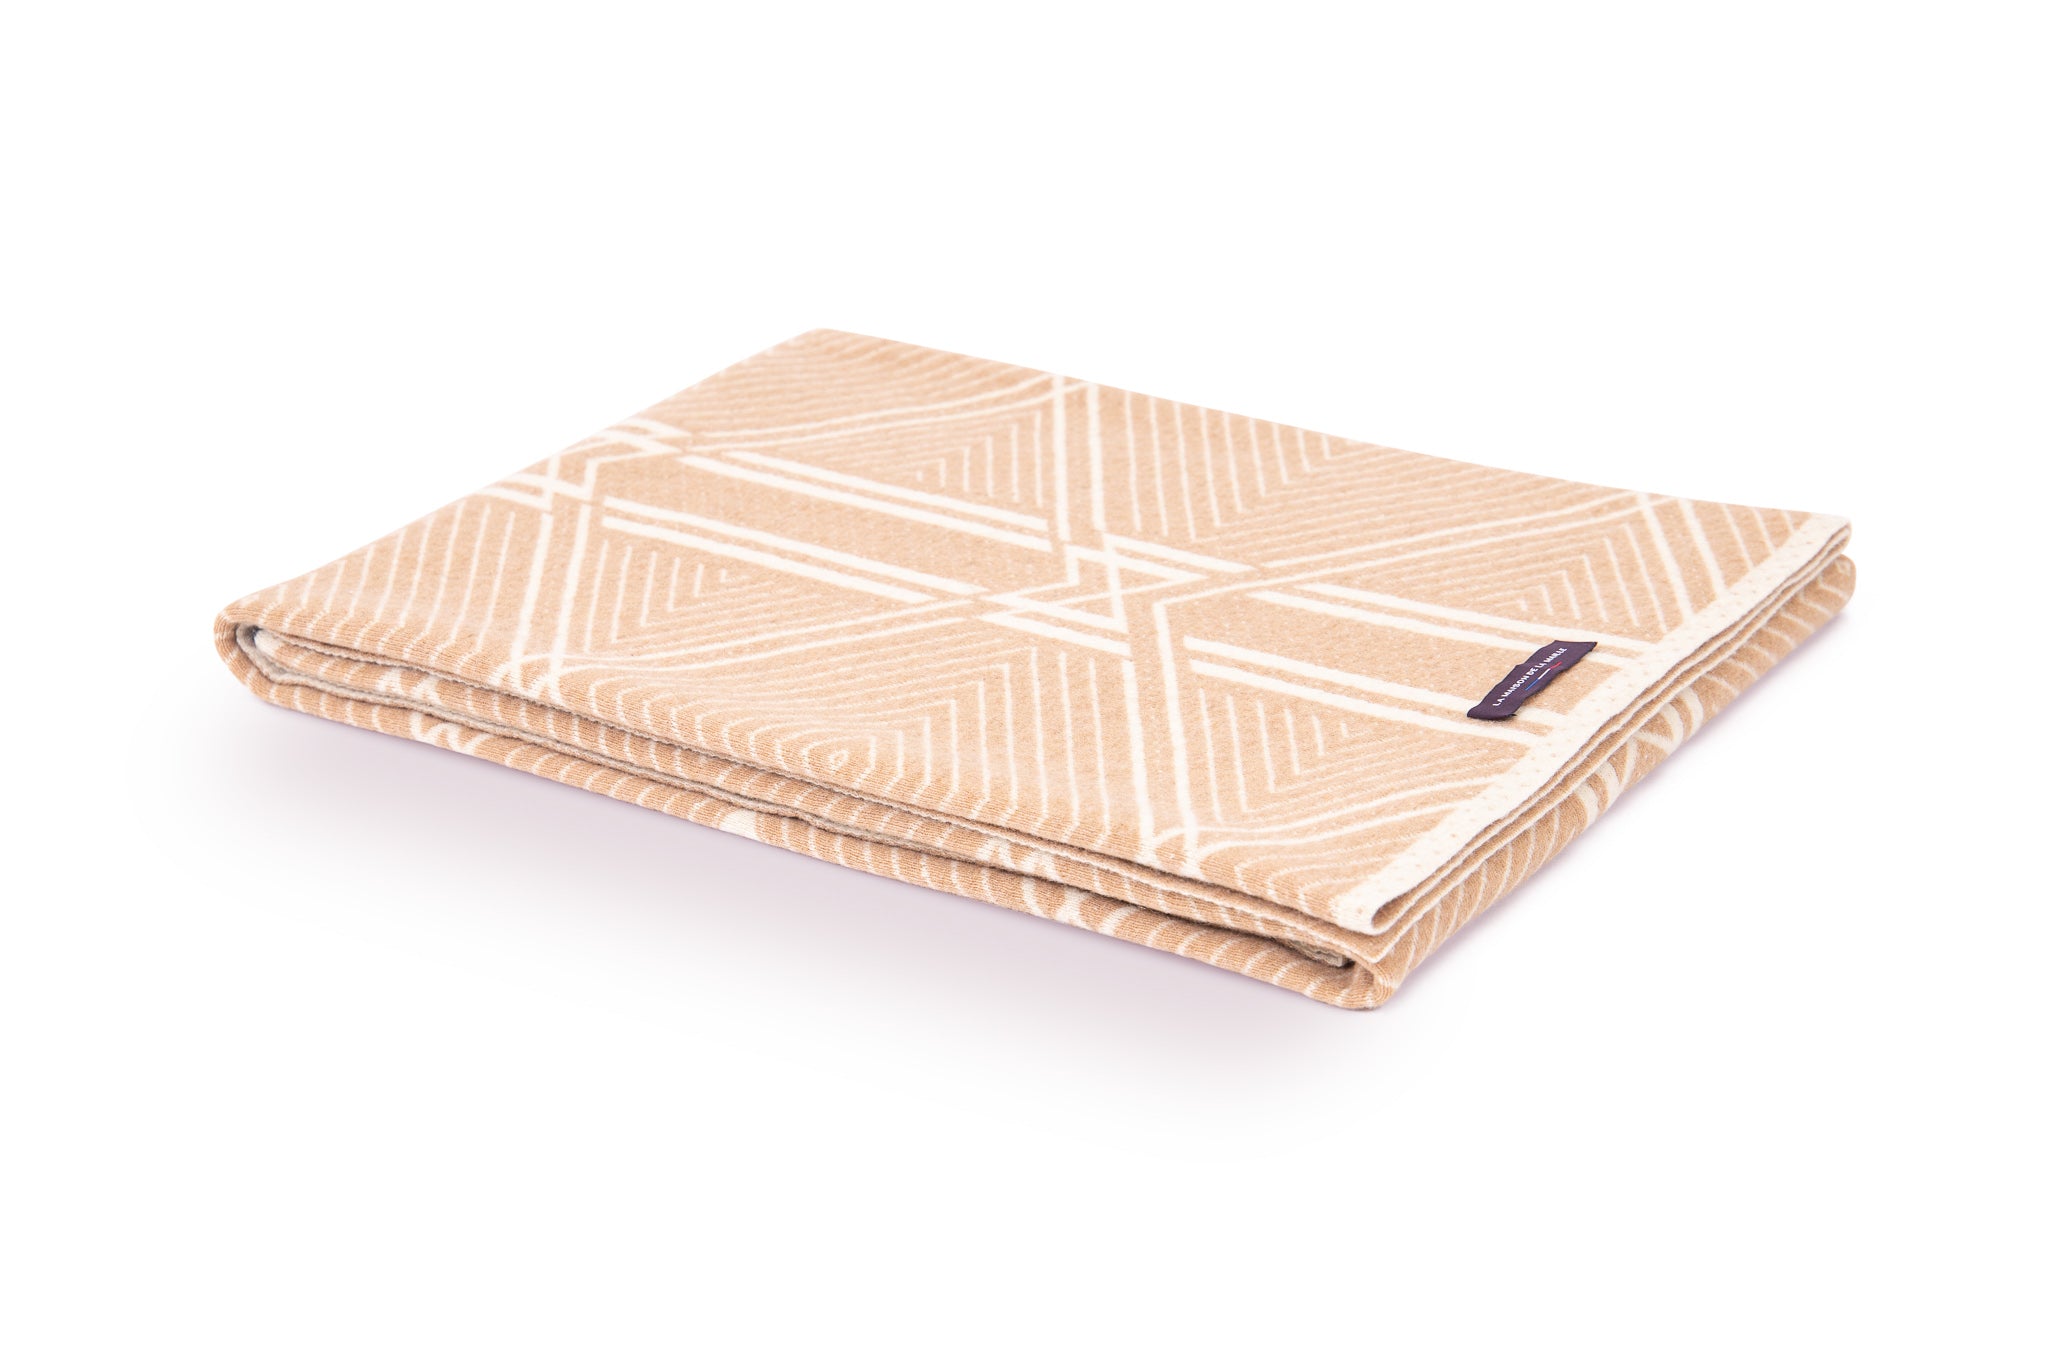 Recycled wool blankets, made in France by La Maison de la Maille